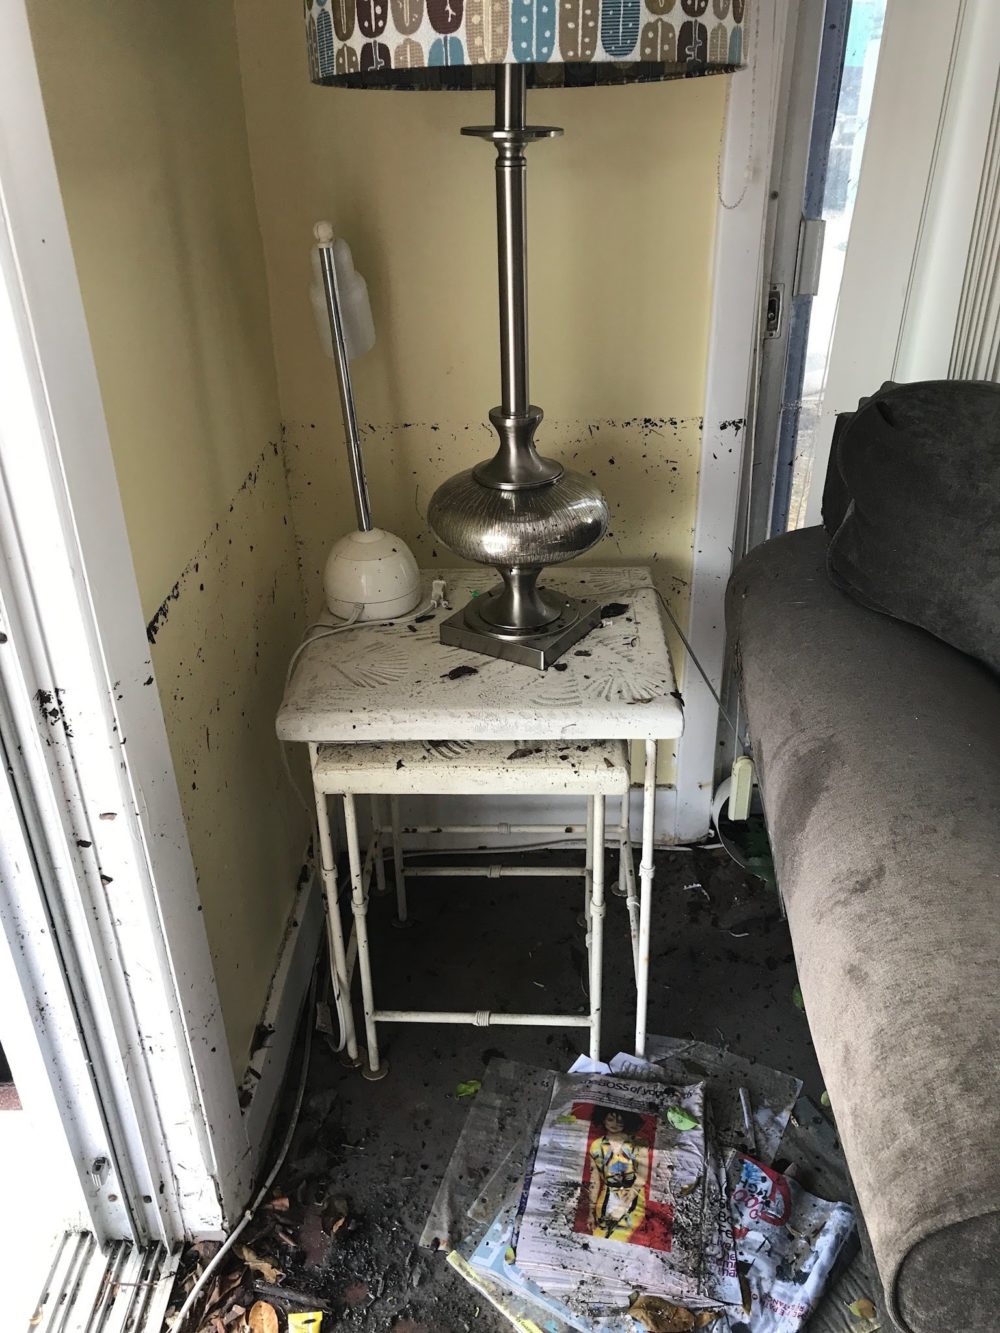 Marks on the wall show the water level in the house from Hurricane Irma. She says her couch was almost completely submerged in water. (Courtesy of Rittel)